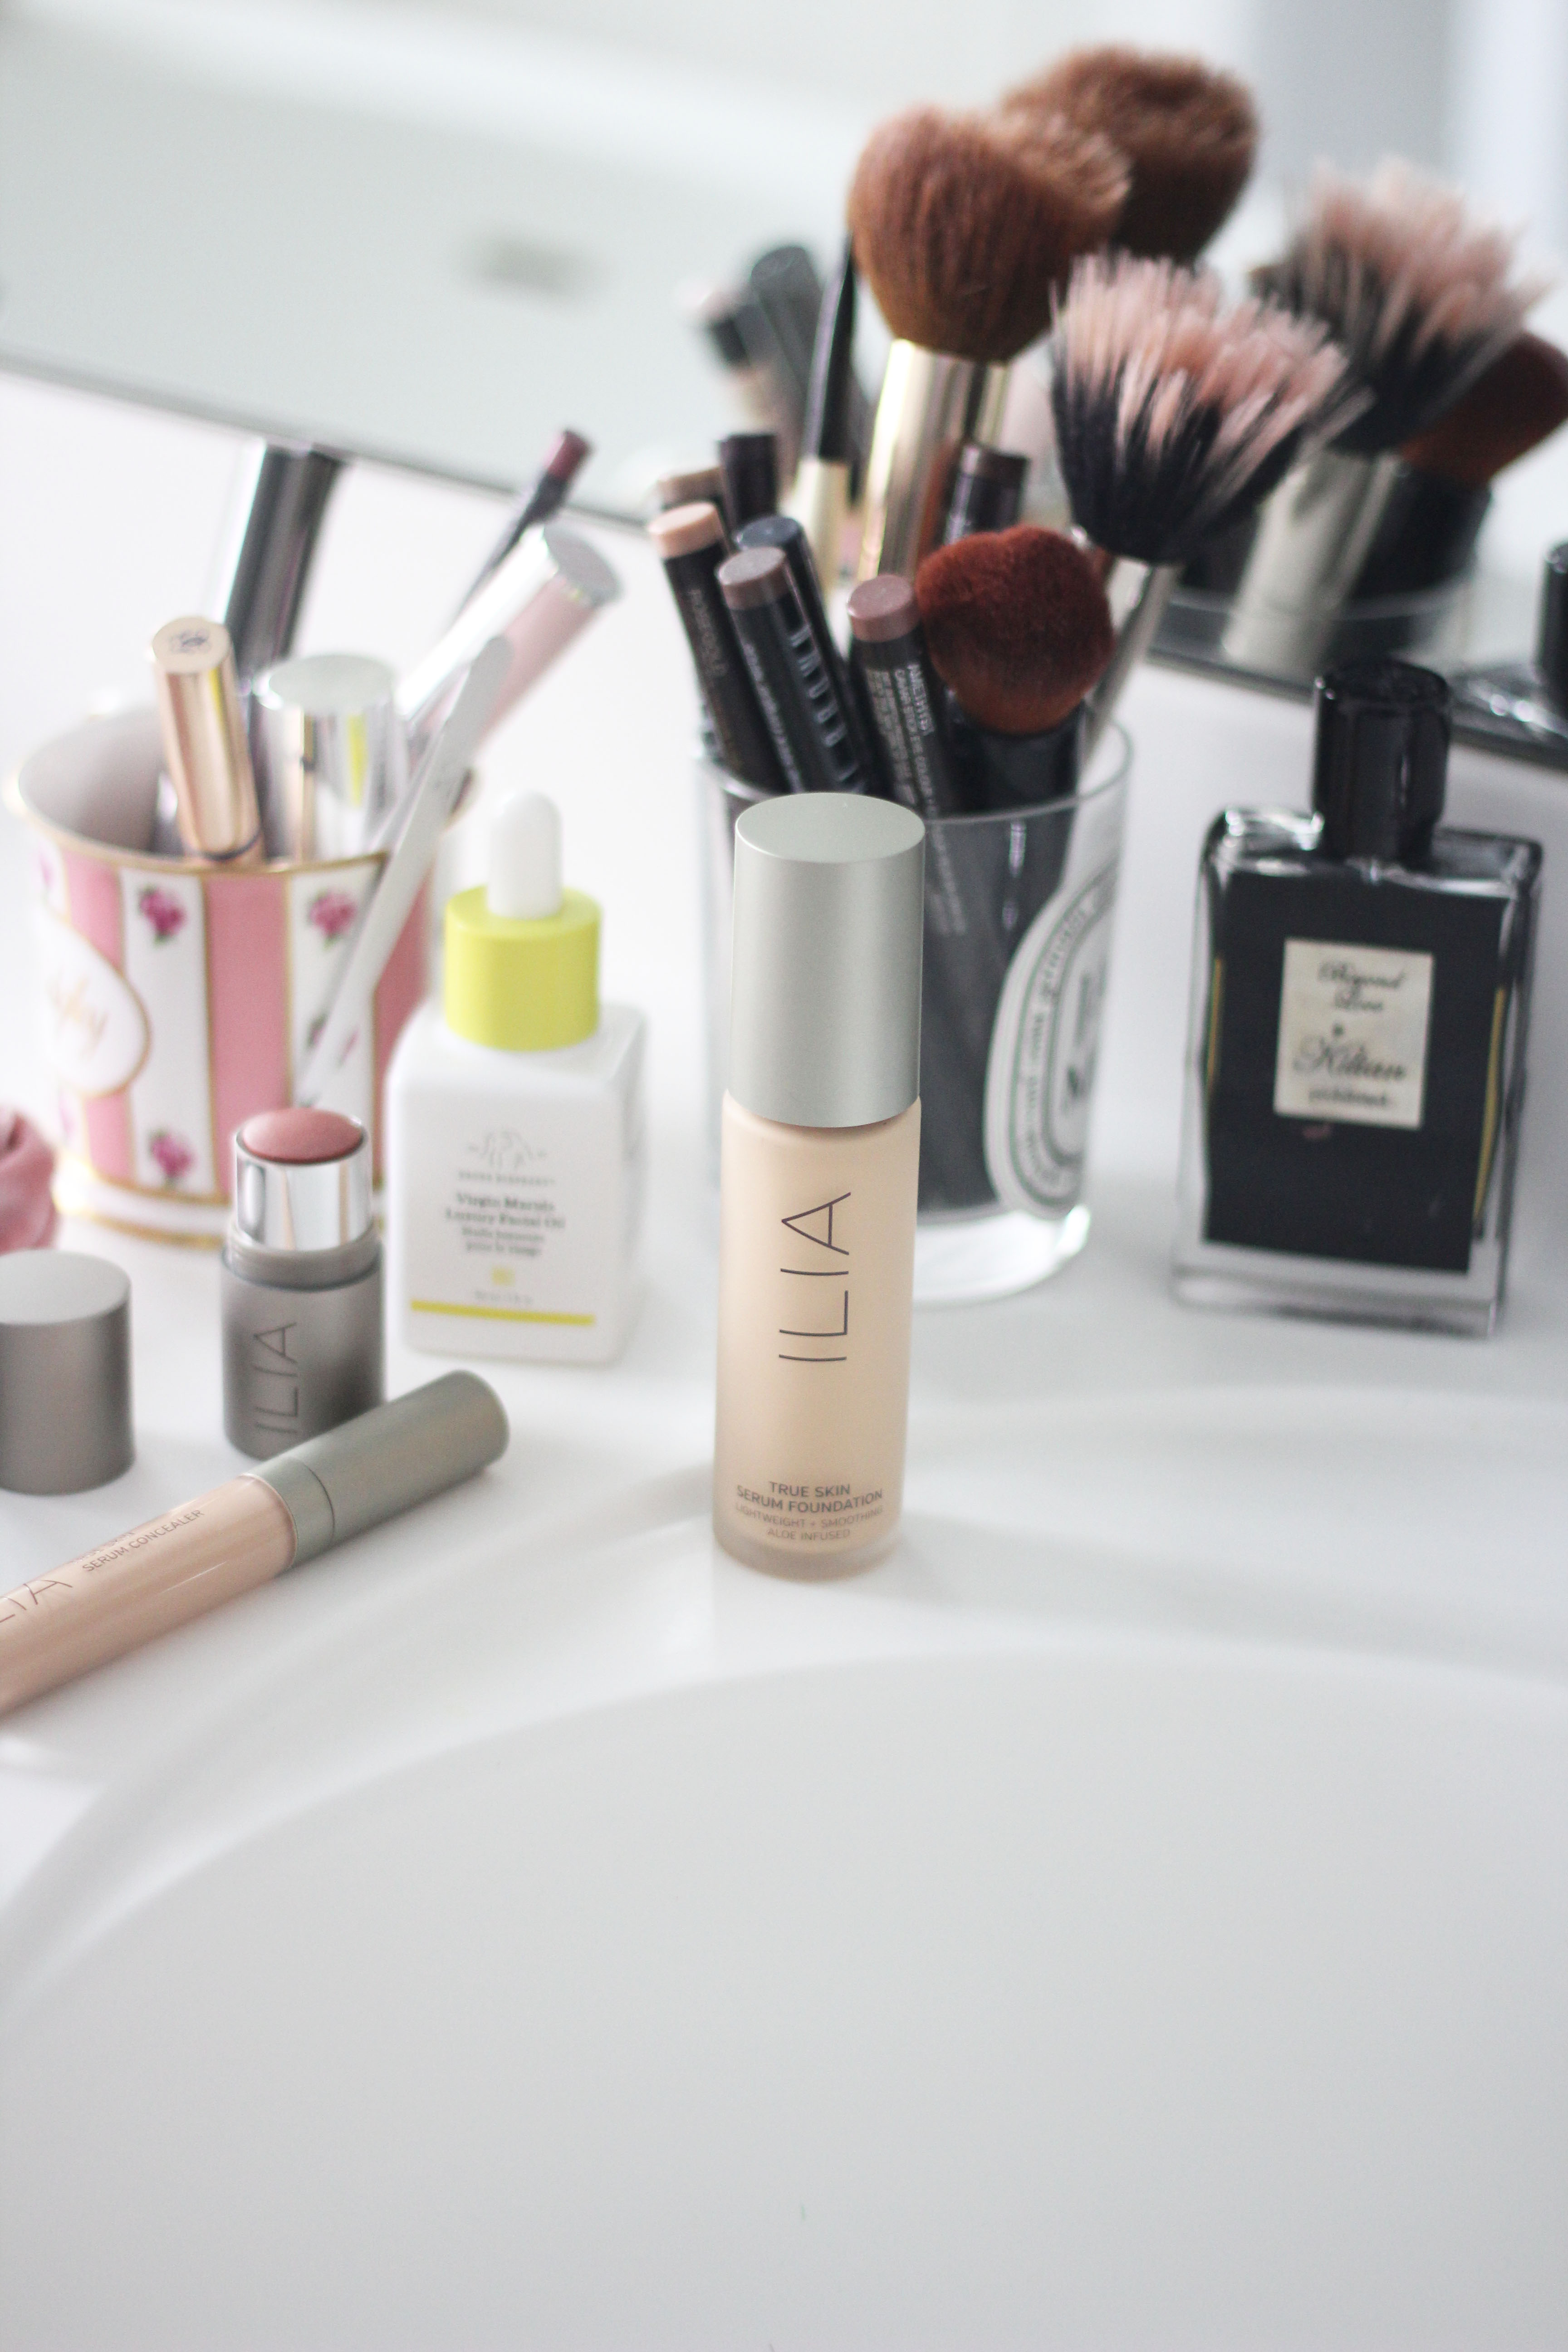 Looking for a clean beauty Foundation and Concealer to nourish, cover and enhance your complexion? Ilia will do all that plus feels great on your skin!